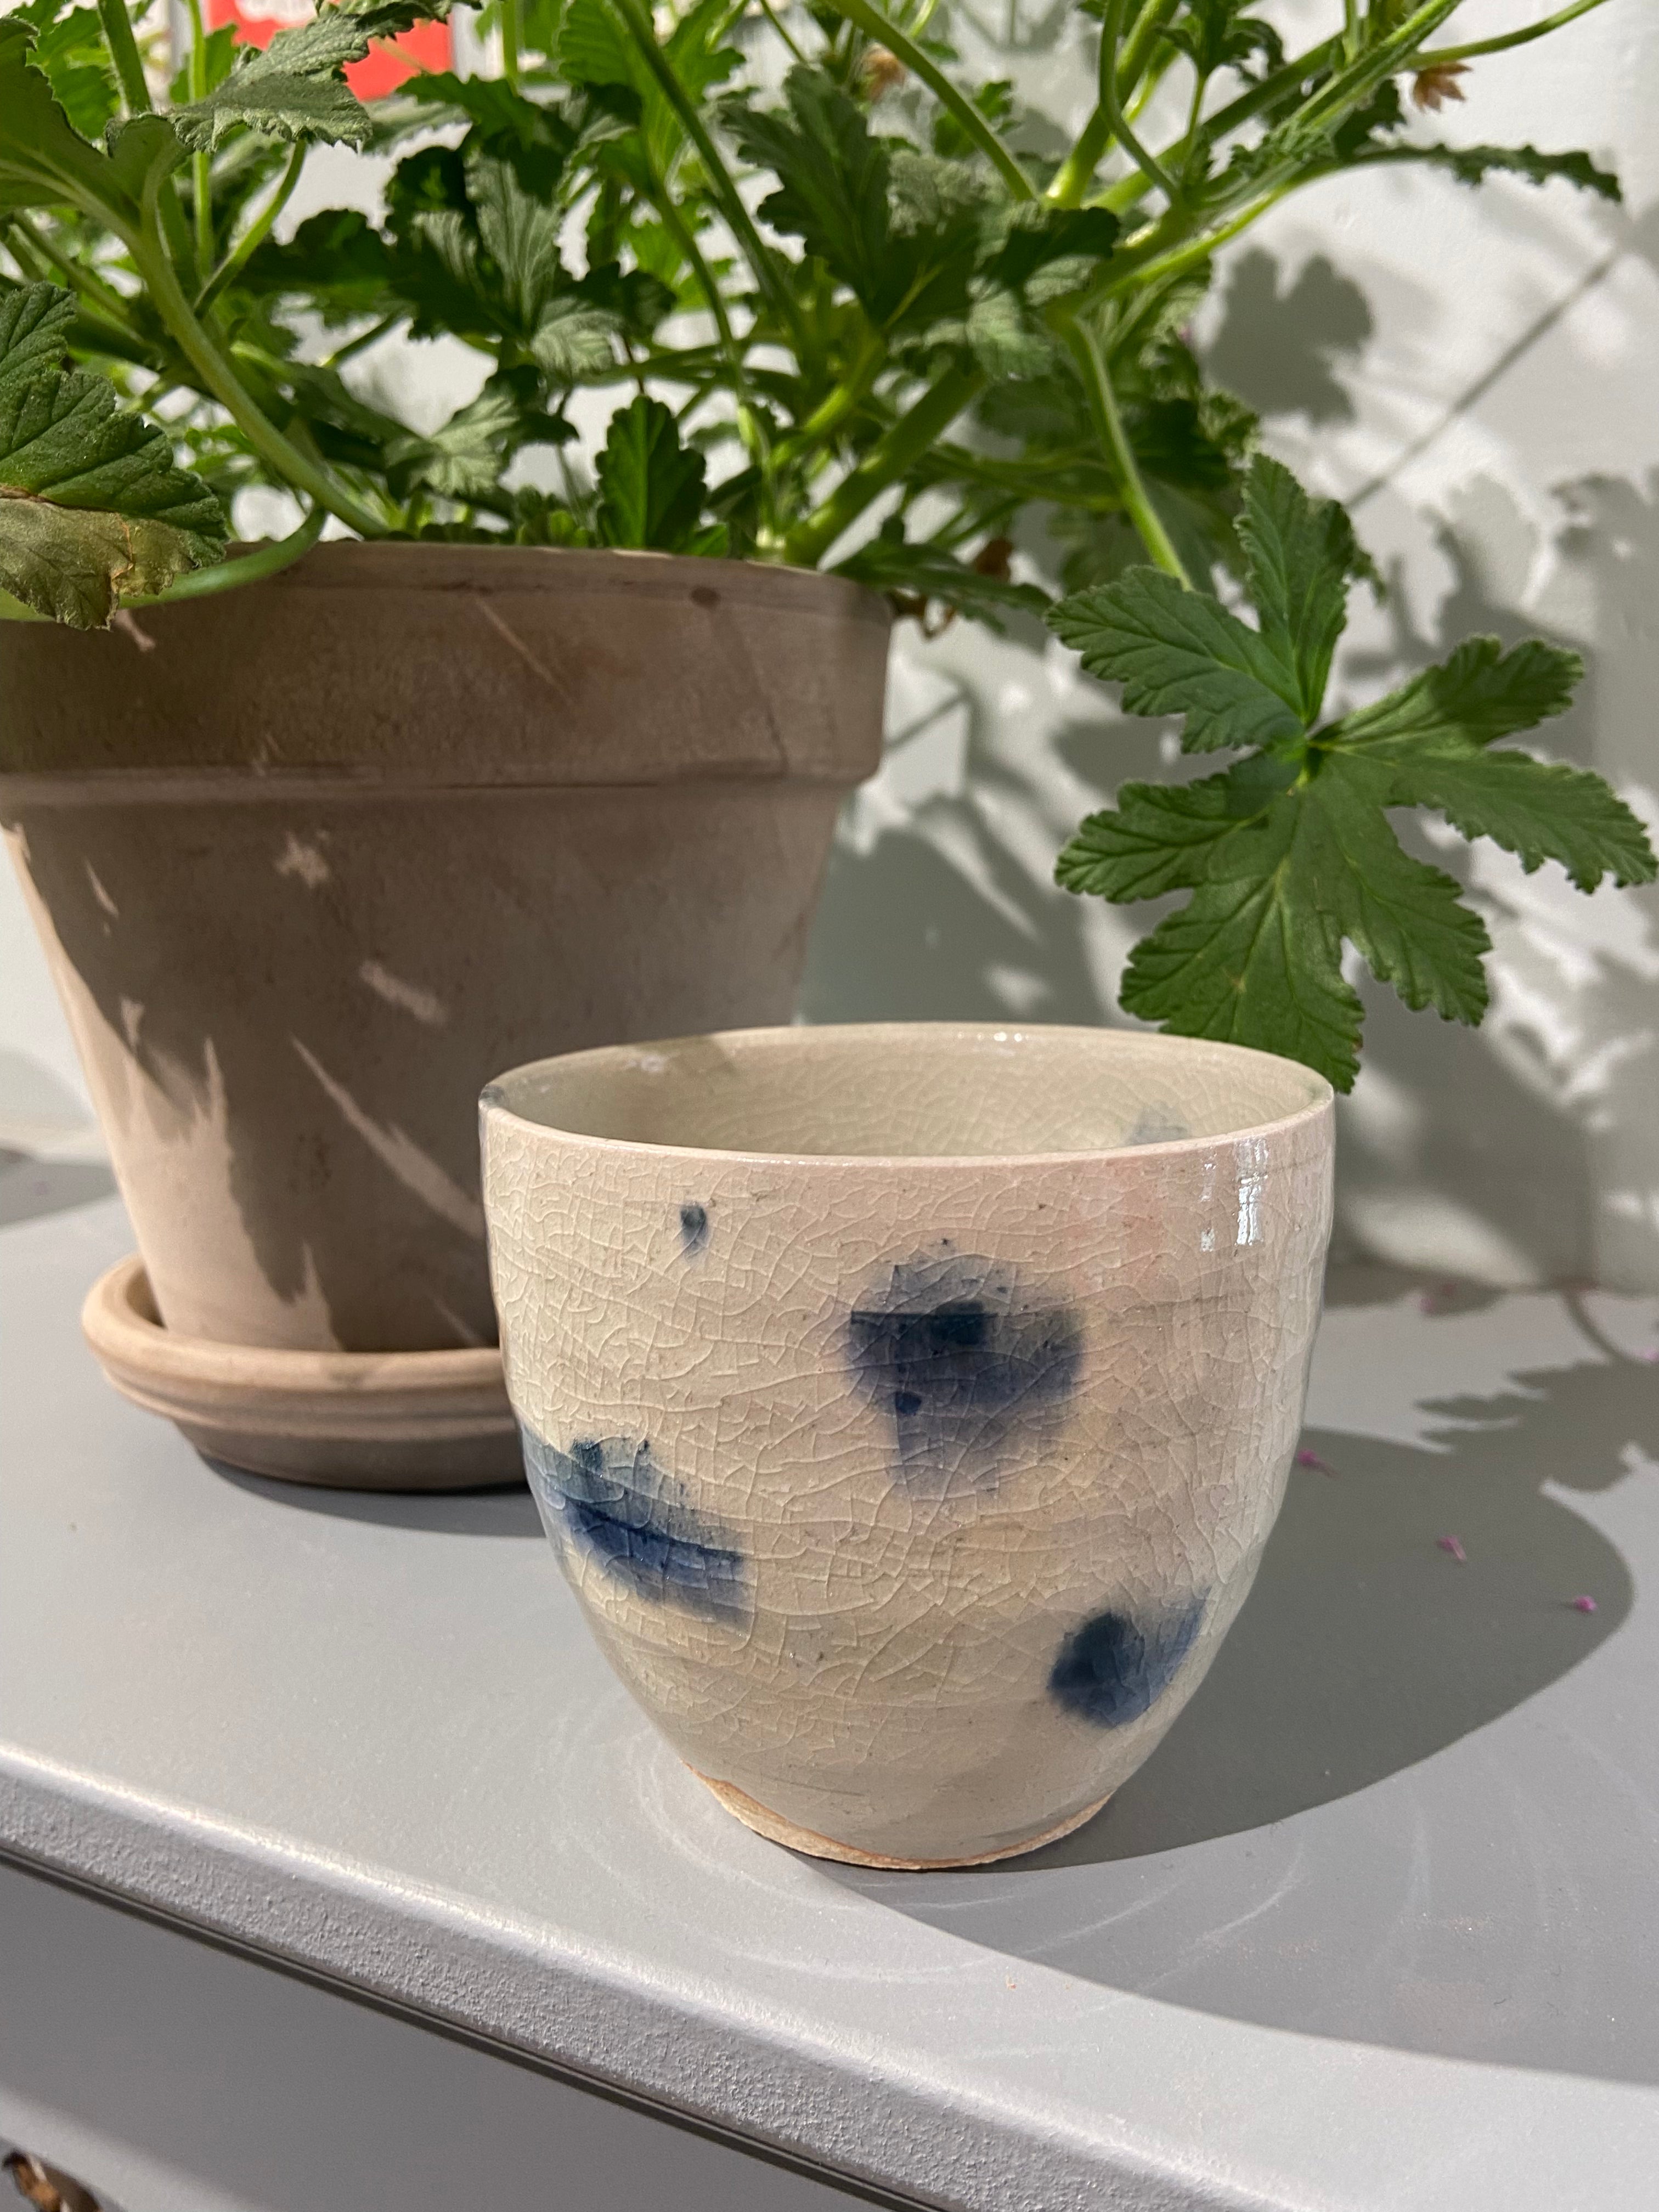 Japanese cup with blue spots